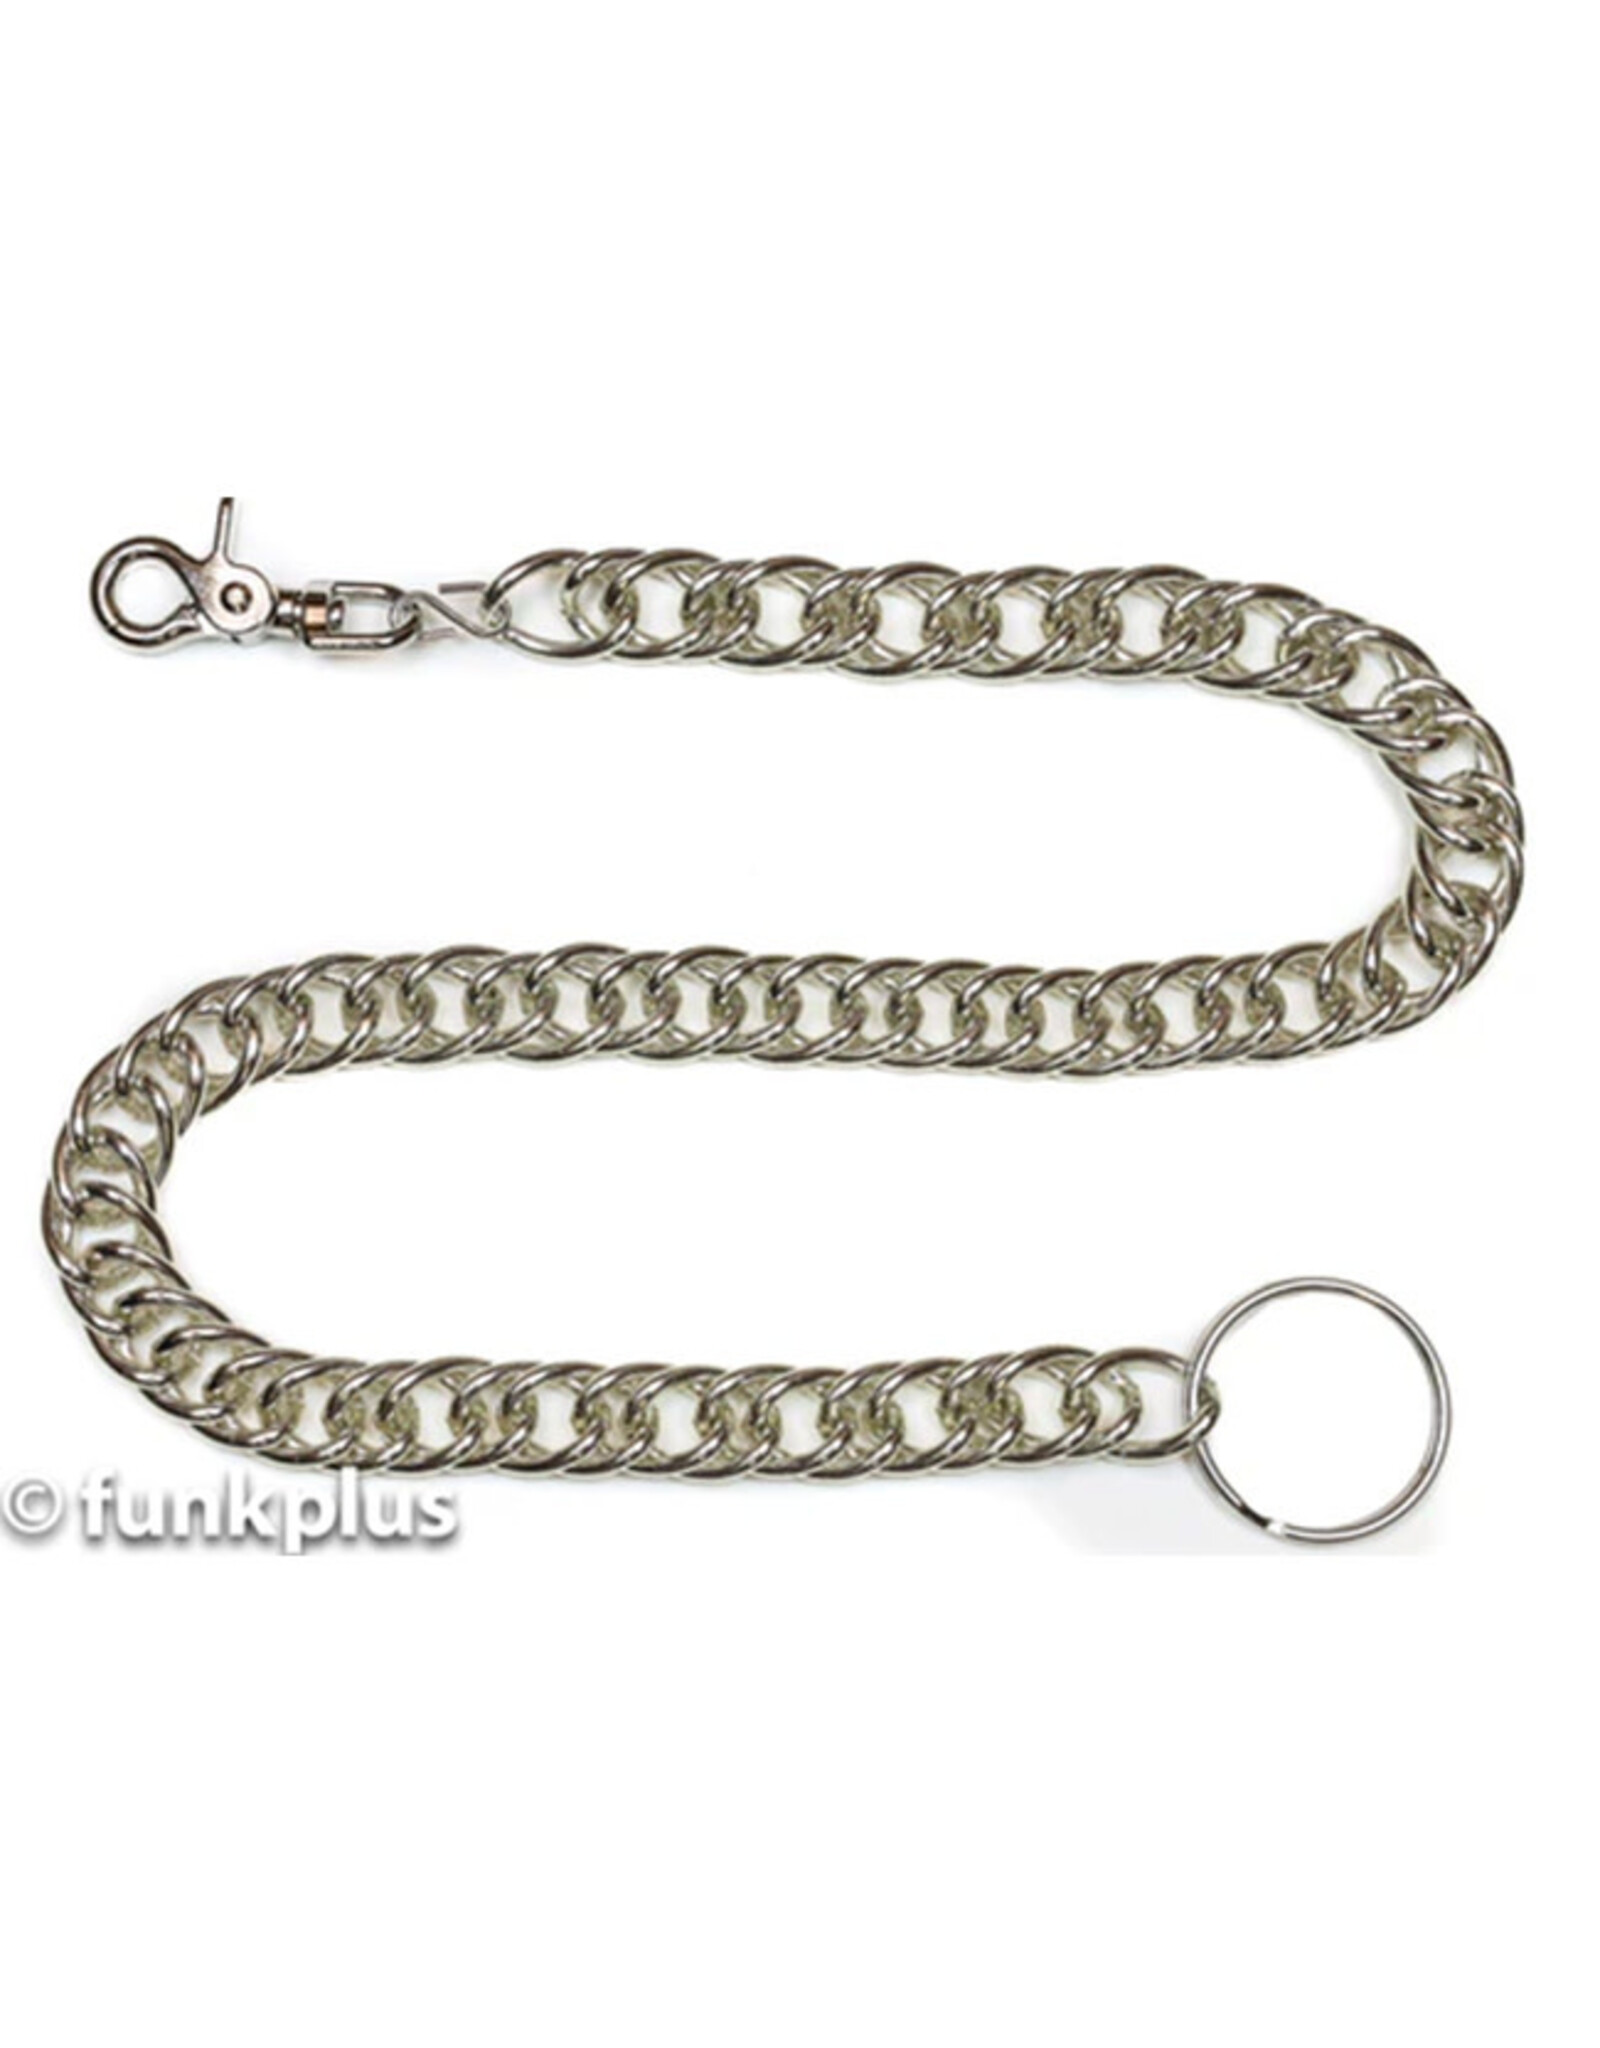 #13 Multiple Large Link Aluminium Chain with Trigger Clasp - KAL